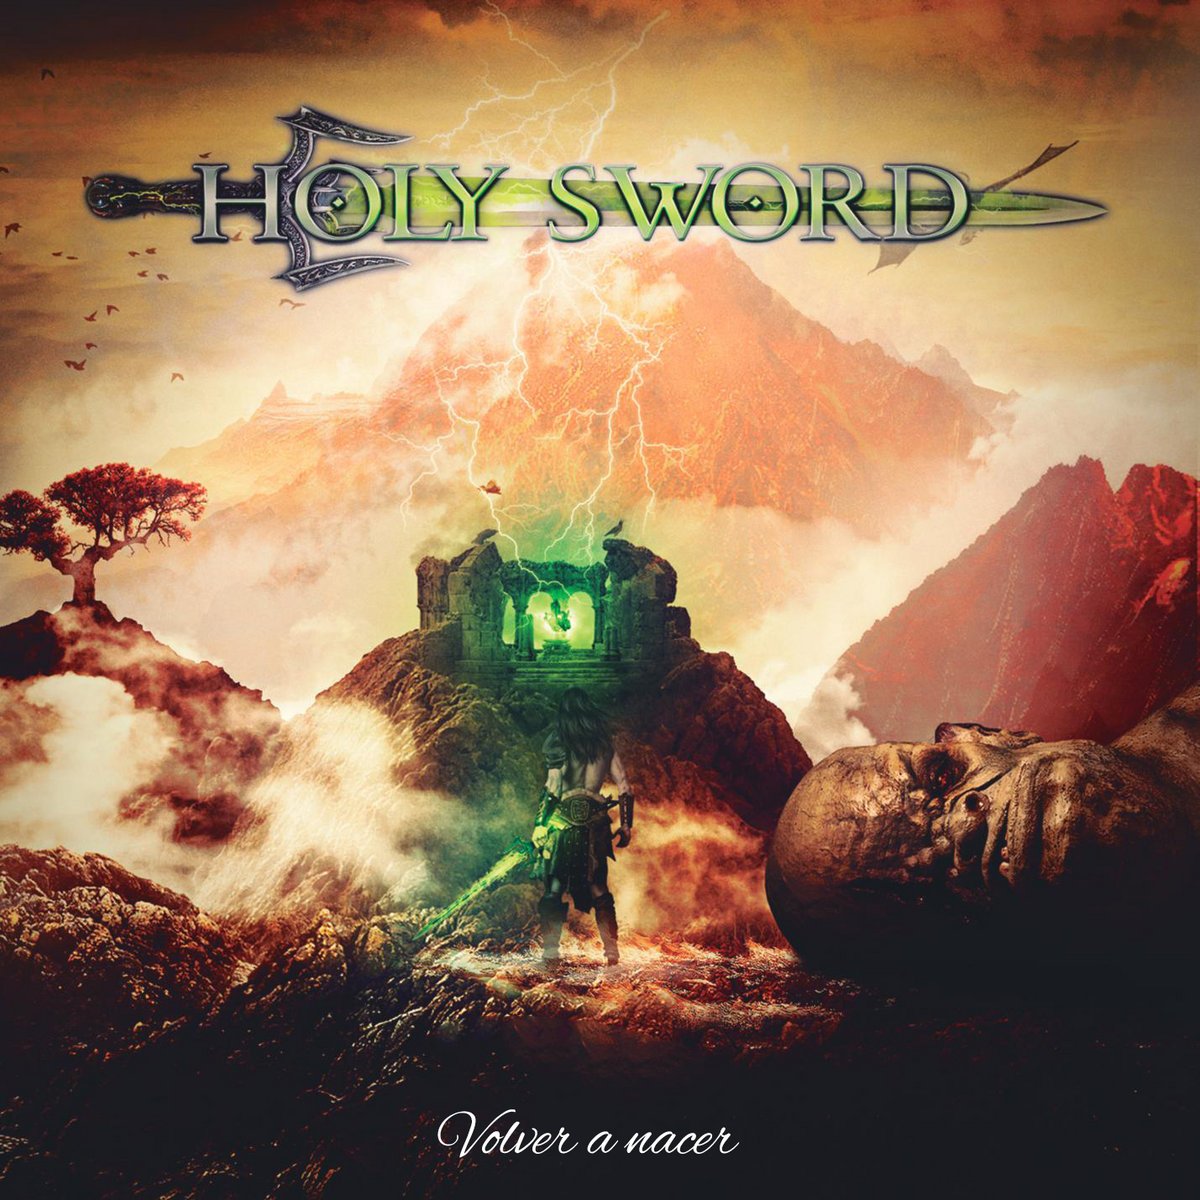 Interview with HOLY SWORD